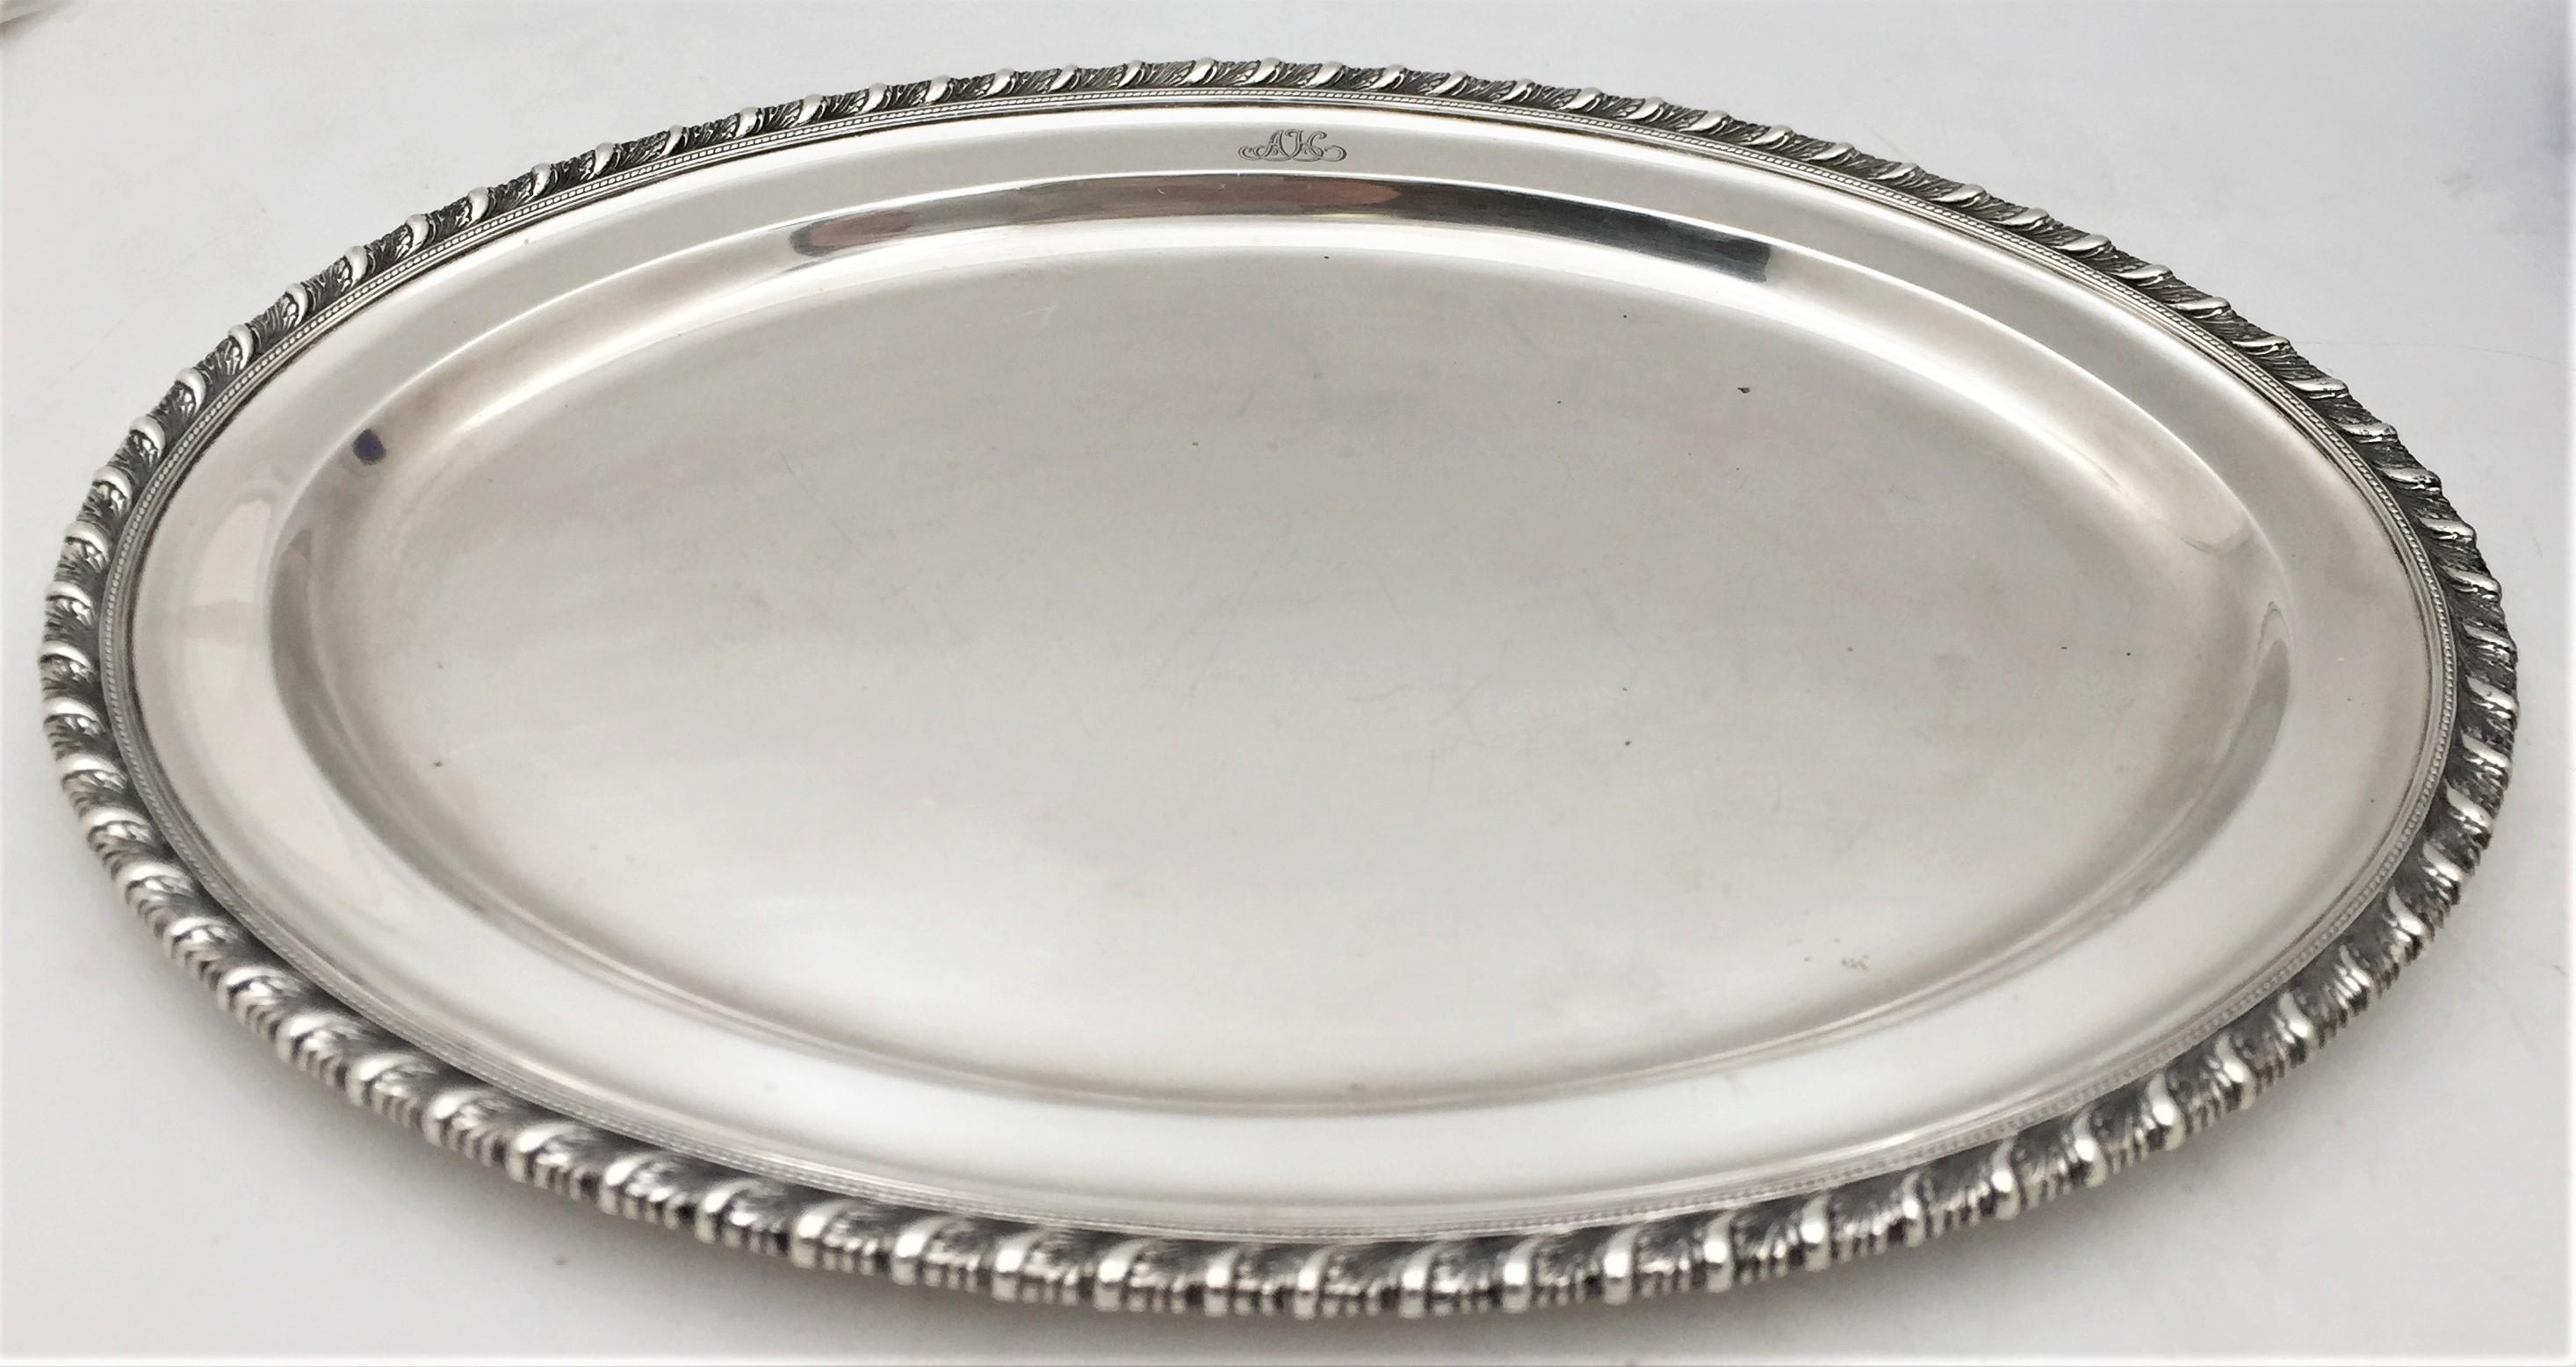 Tiffany & Co. sterling silver tray or platter in pattern number 19961 from 1921, with a rope border showing stylized natural motifs. It measures 16 1/8'' in length by 11 1/2'' in width by 7/8'' in height, weighs 45.4 troy ounces, and bears hallmarks